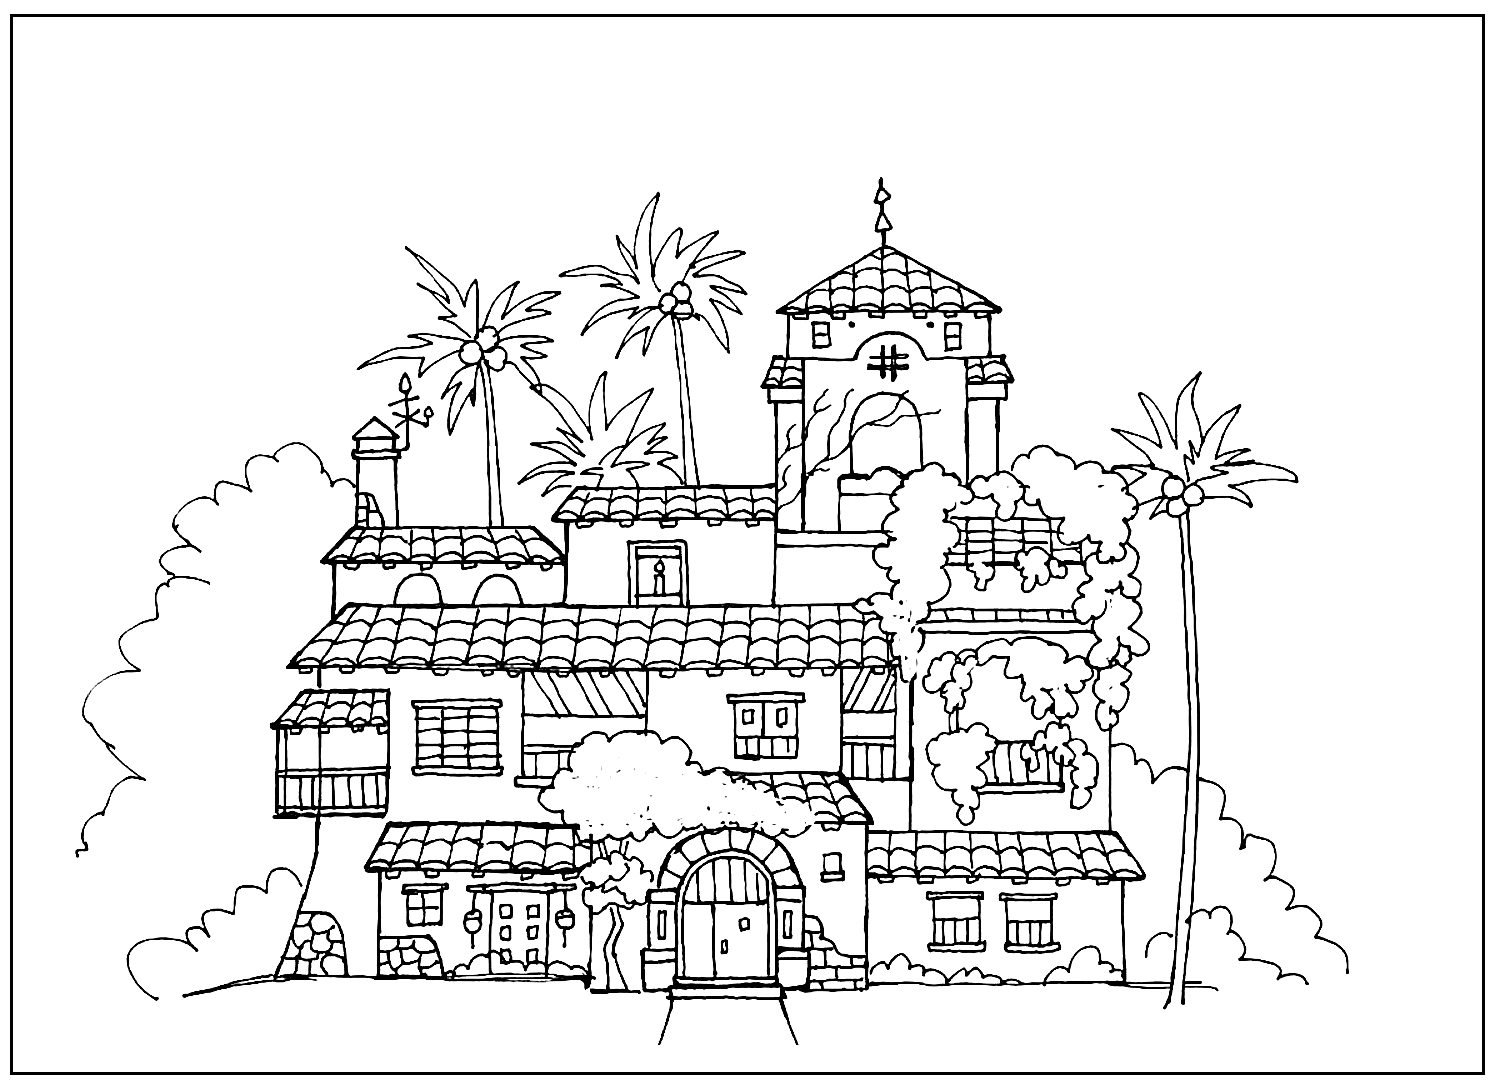 Encanto madrigal house coloring page